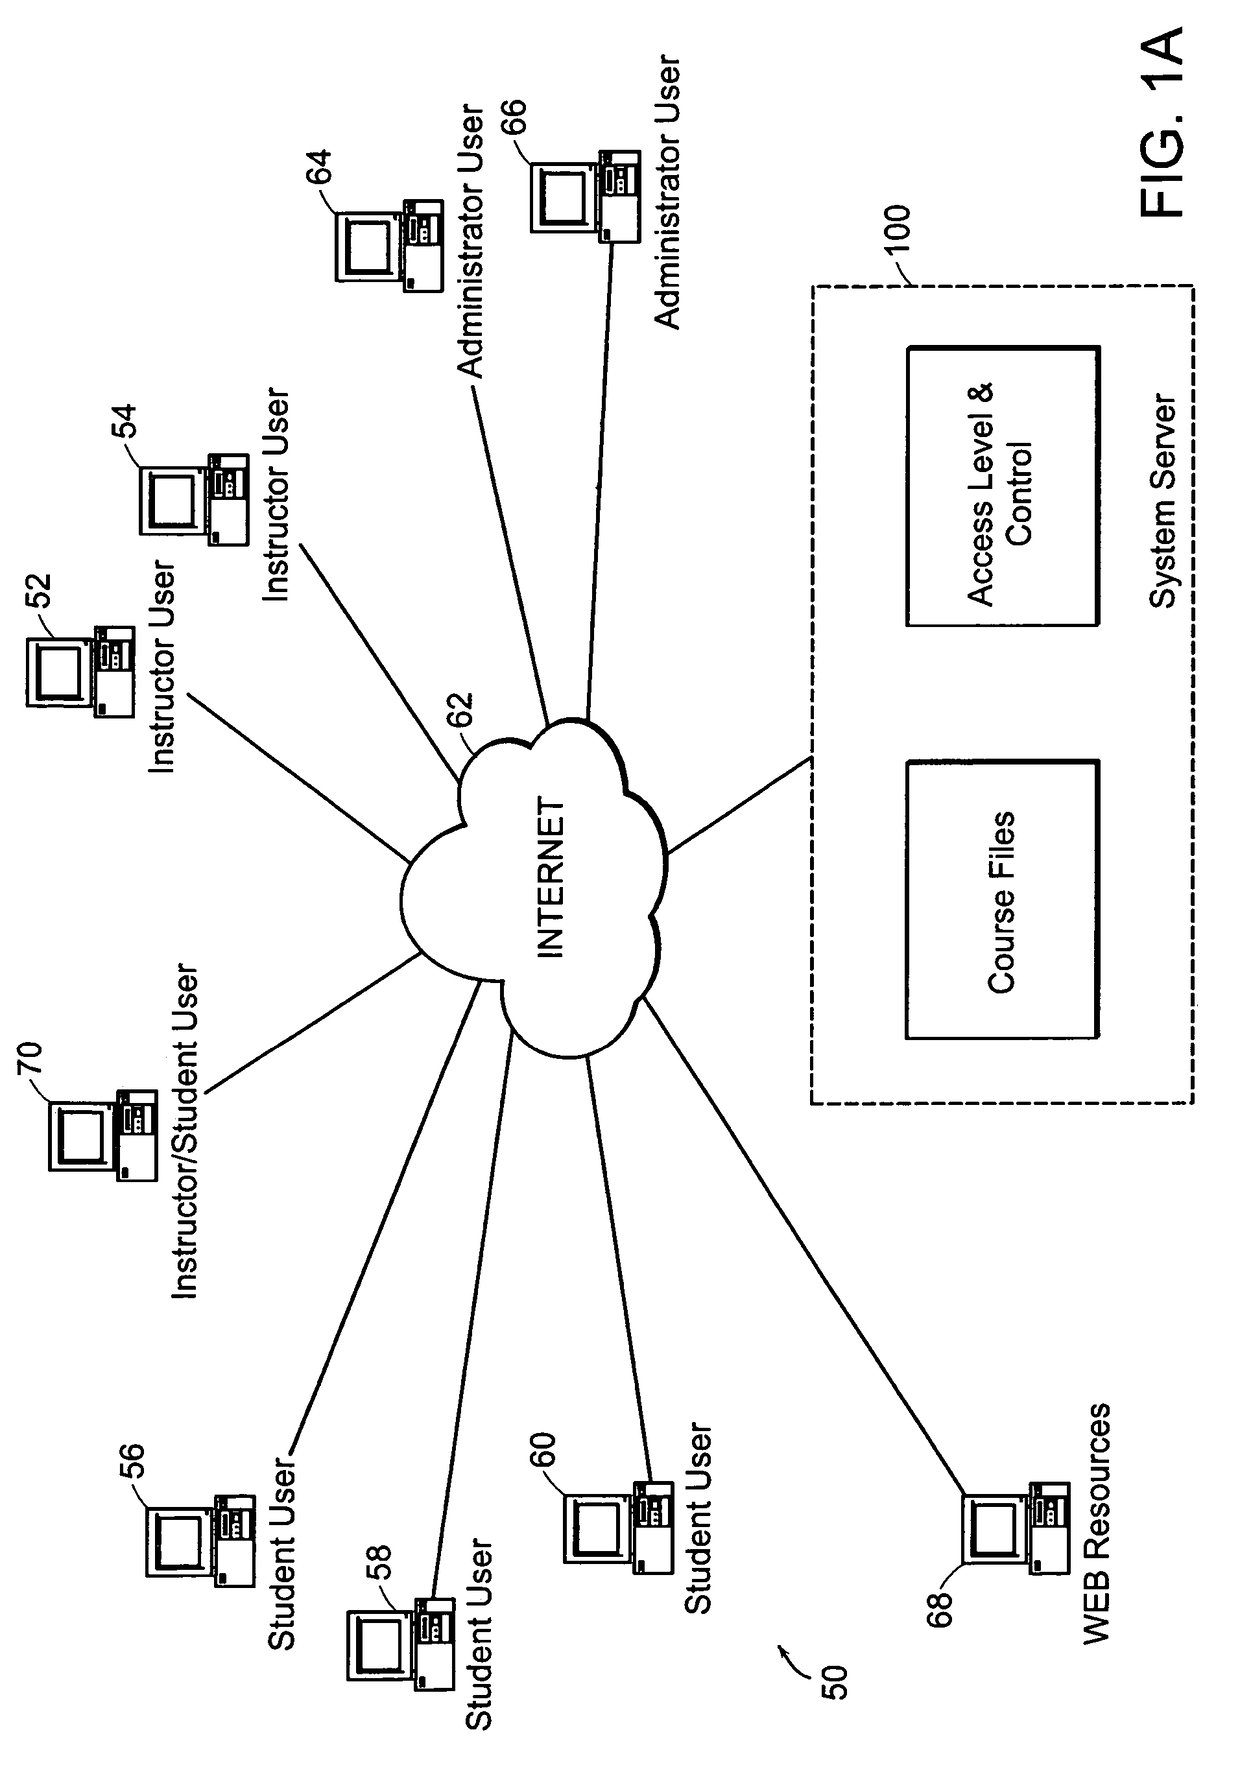 Internet-based education support system, method and medium providing security attributes in modular, extensible components